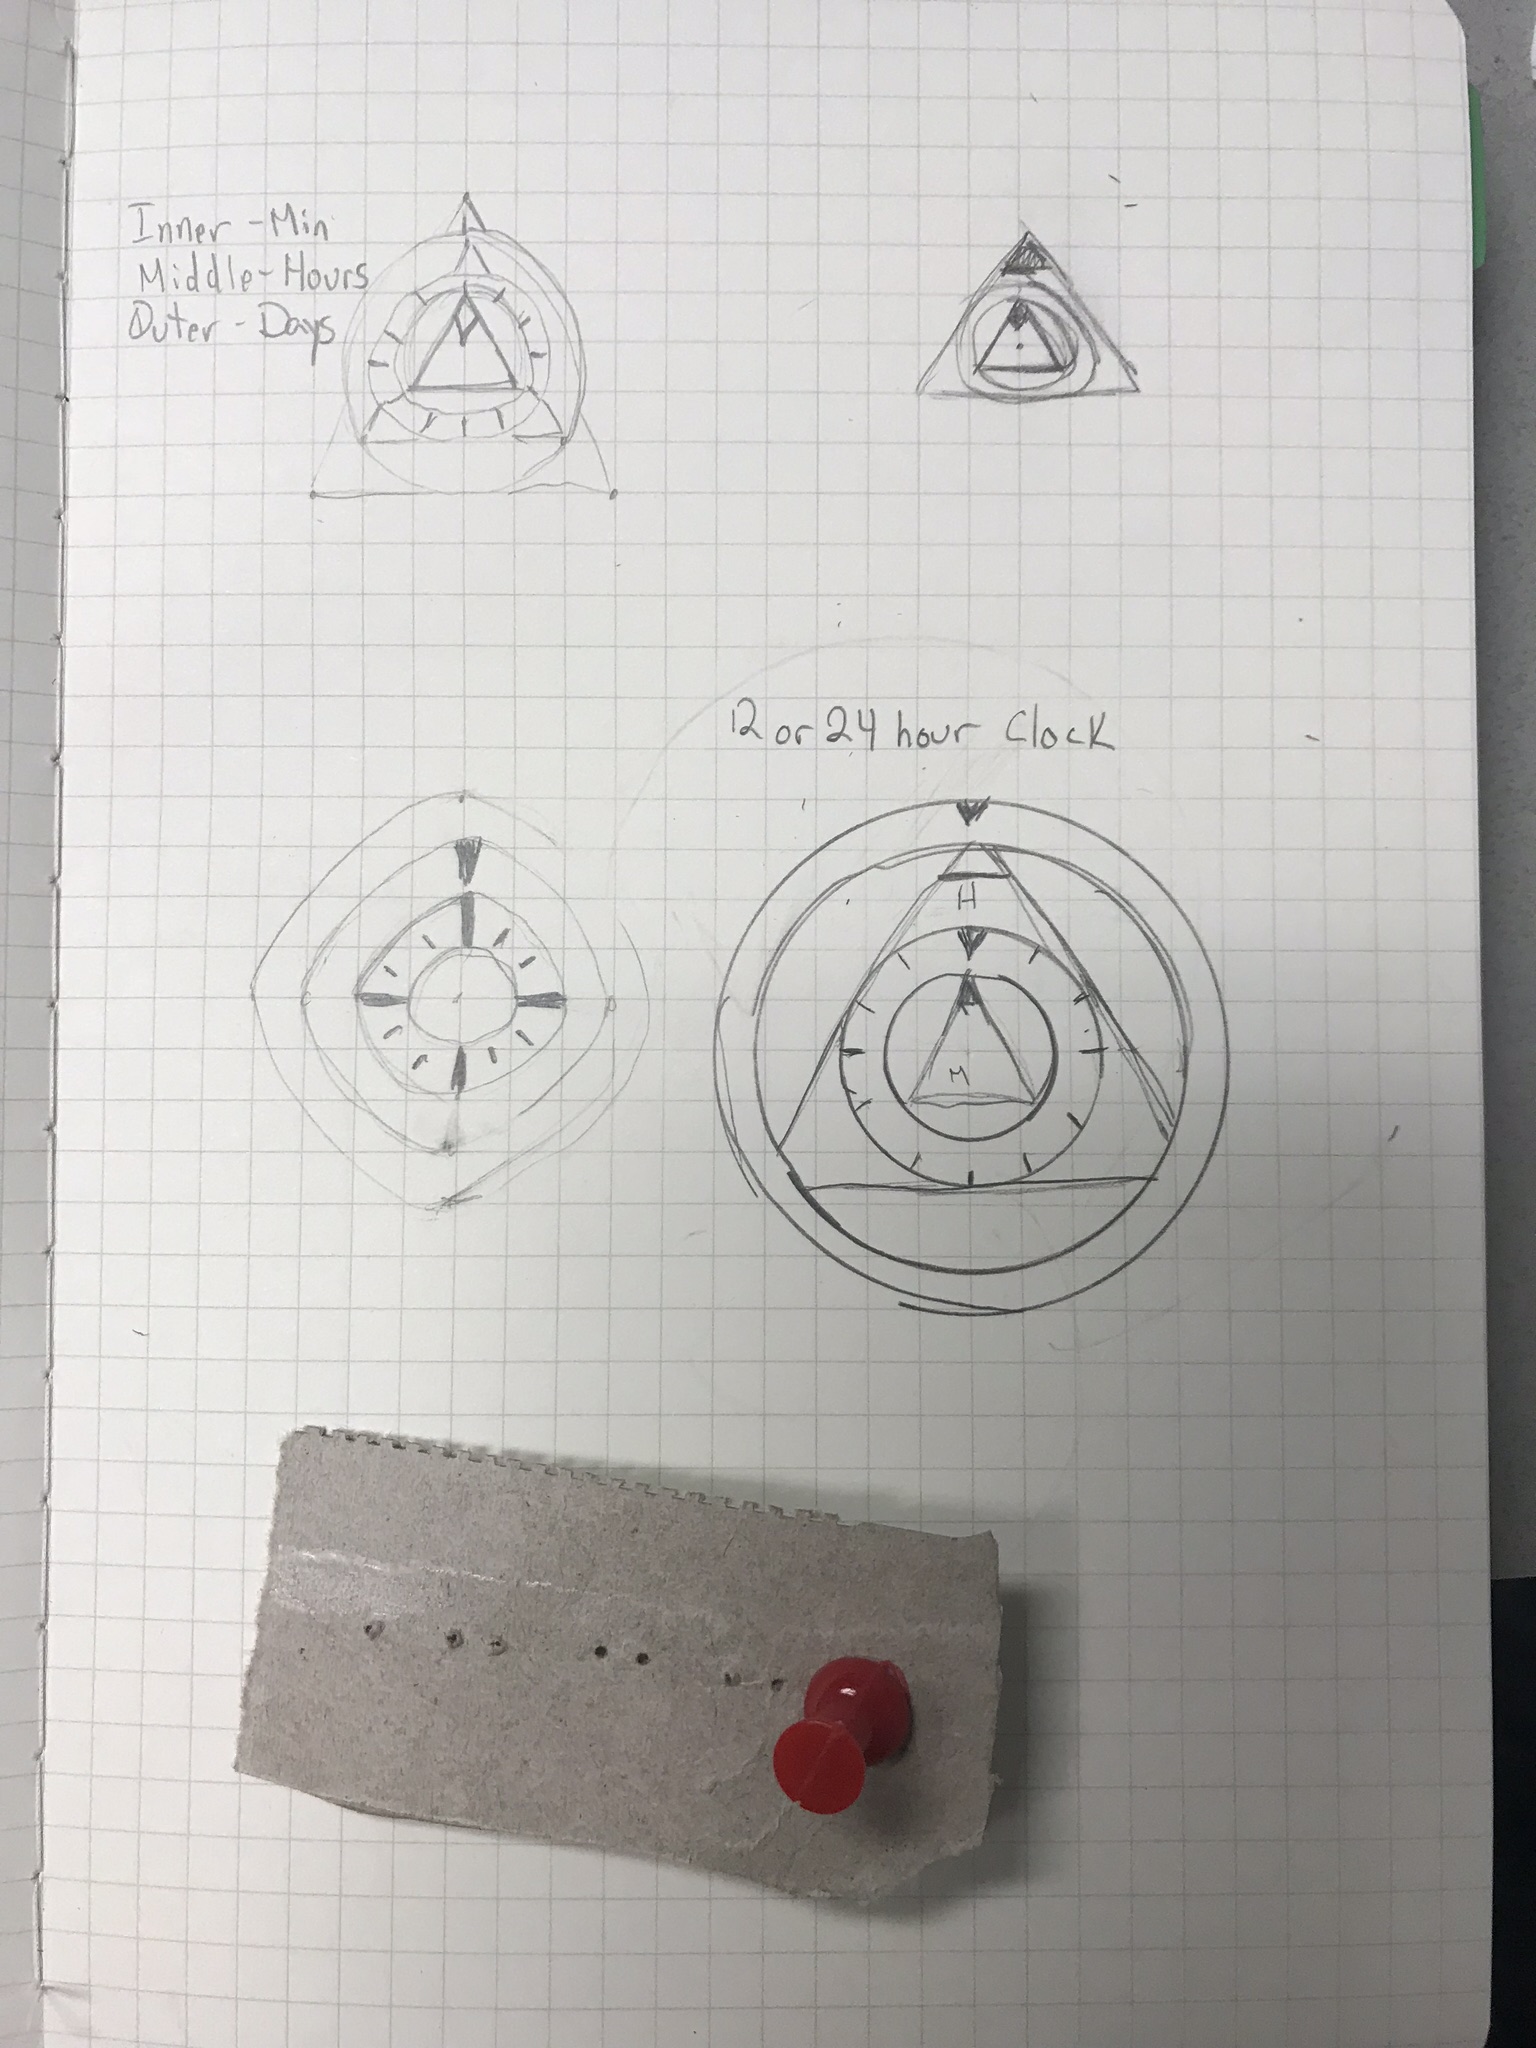 Some sketches of clock ideas